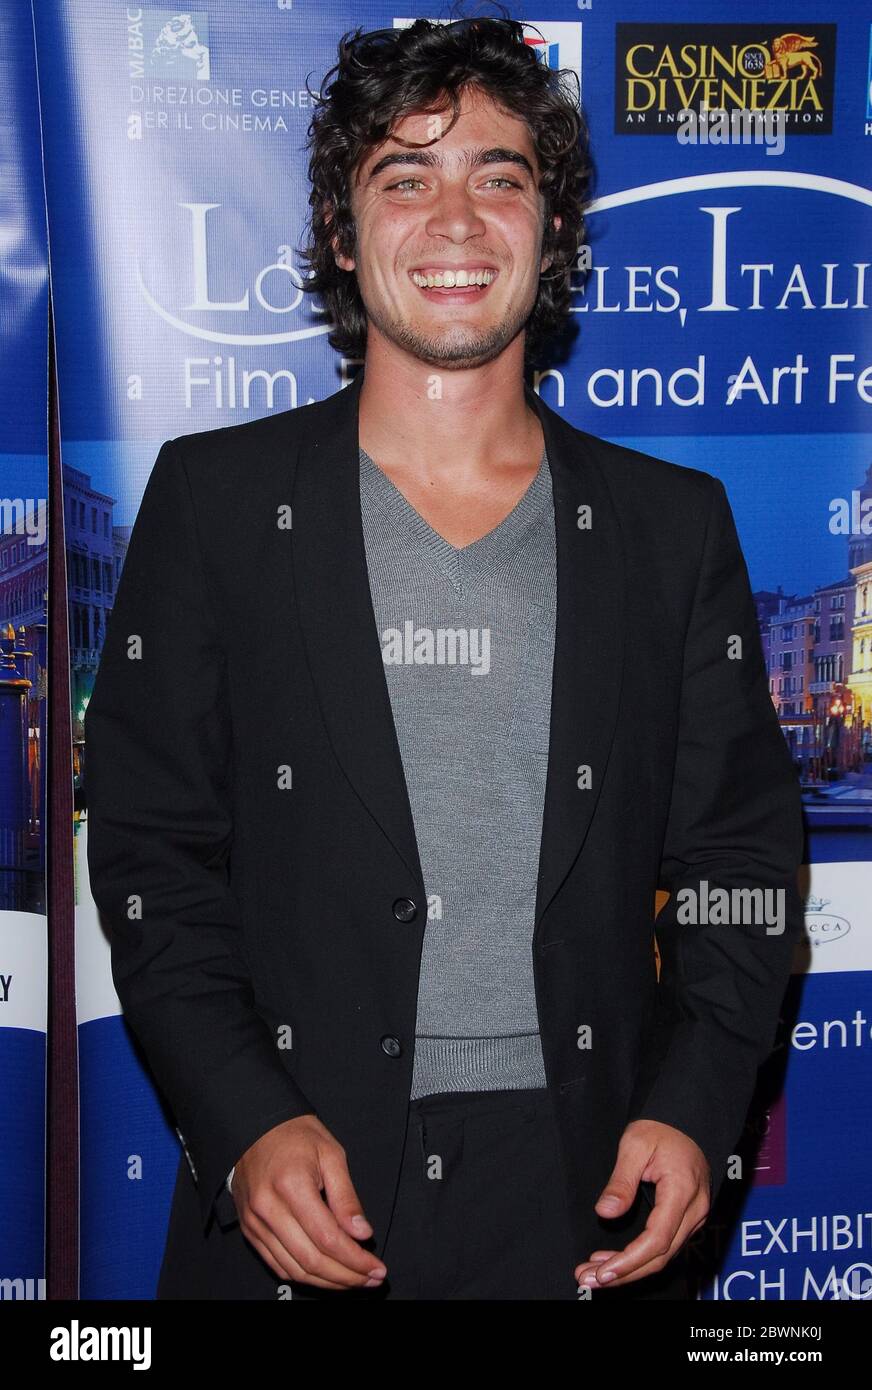 Riccardo Scamarcio at the 'Los Angeles, Italia' FIlm Festival Presents the Los Angeles Premiere of 'All The Invisible Children held at the Mann Chinese 6 Theatres in Hollywood, CA. The event took place on Monday, February 19, 2007. Photo by: SBM / PictureLux- File Reference # 34006-3200SBMPLX Stock Photo